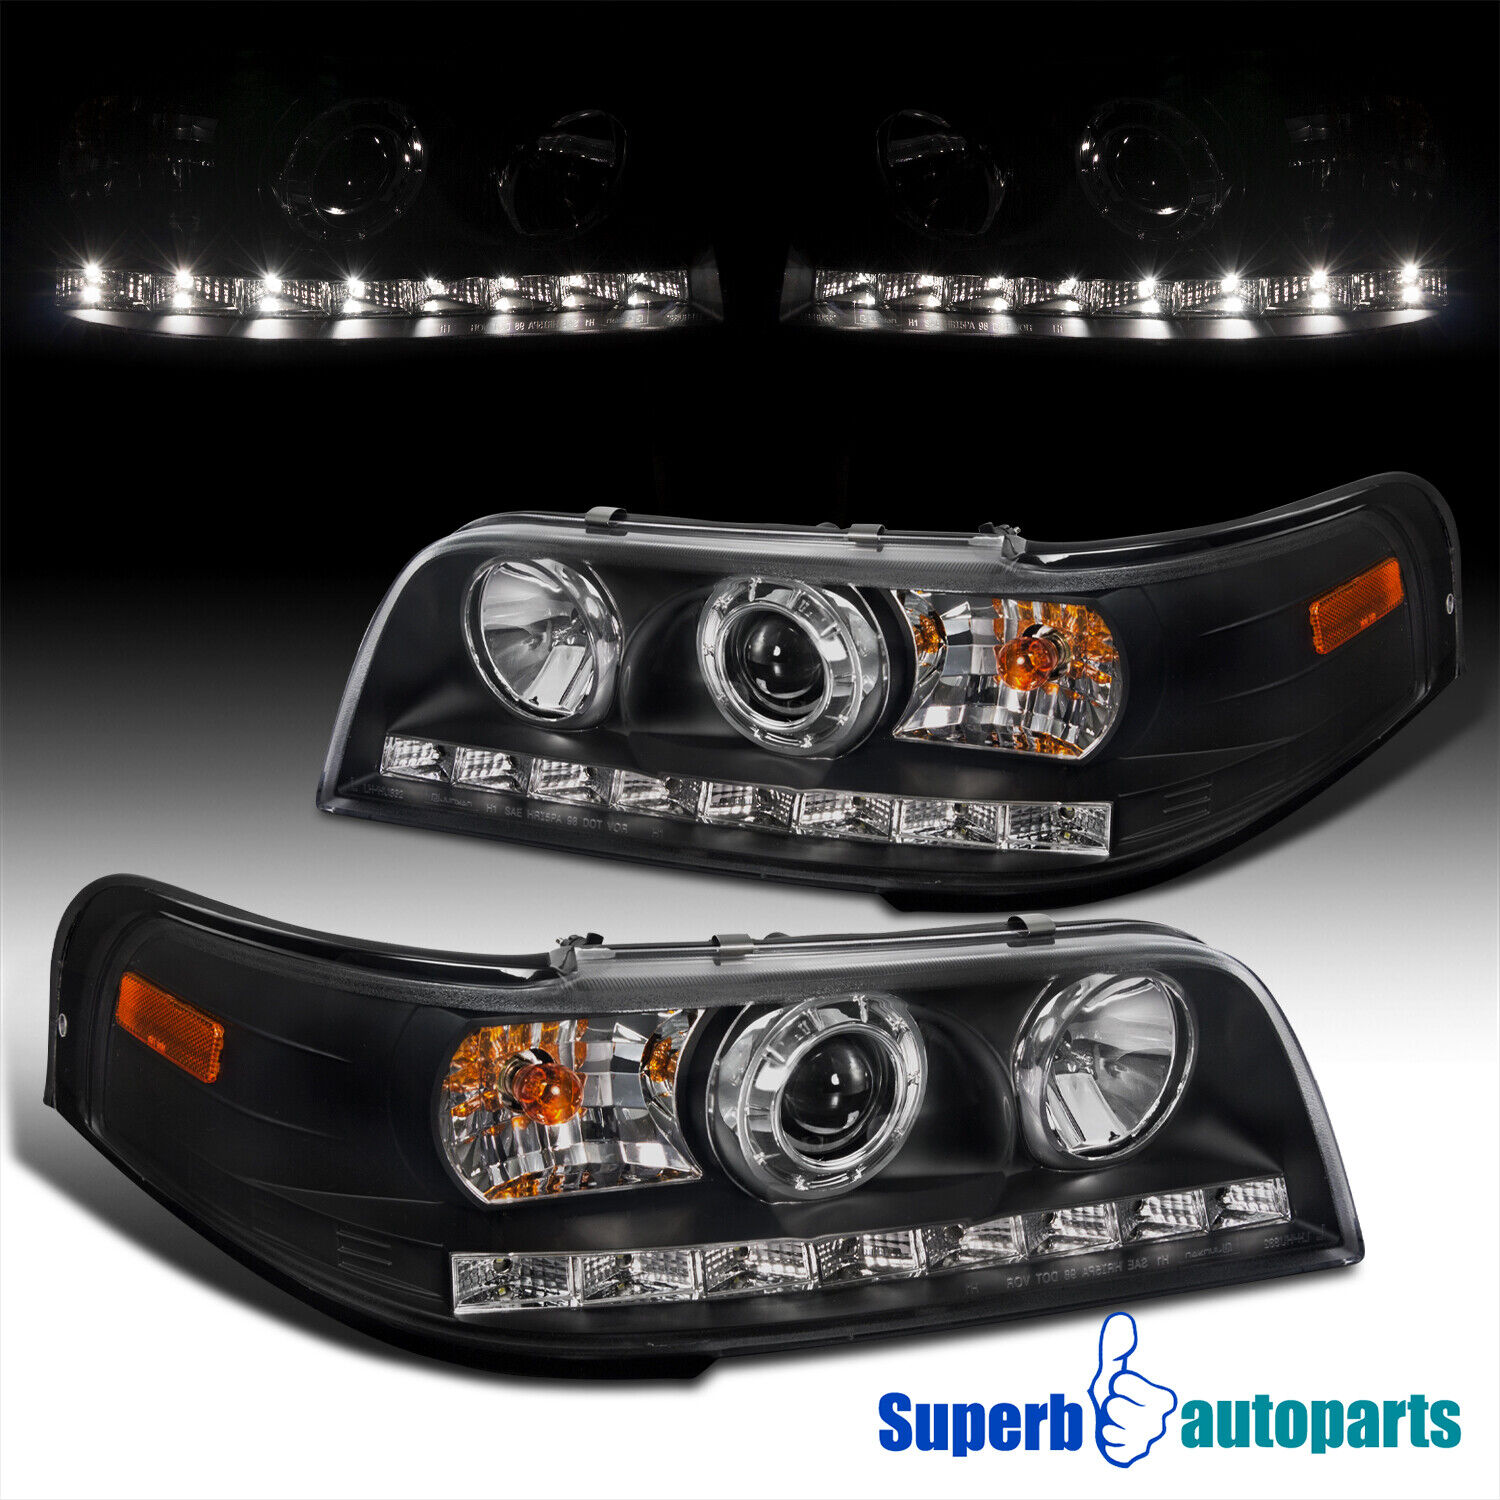 Fit 1998-2011 Ford Crown Victoria Projector Headlights Black Head Lamp LED Strip